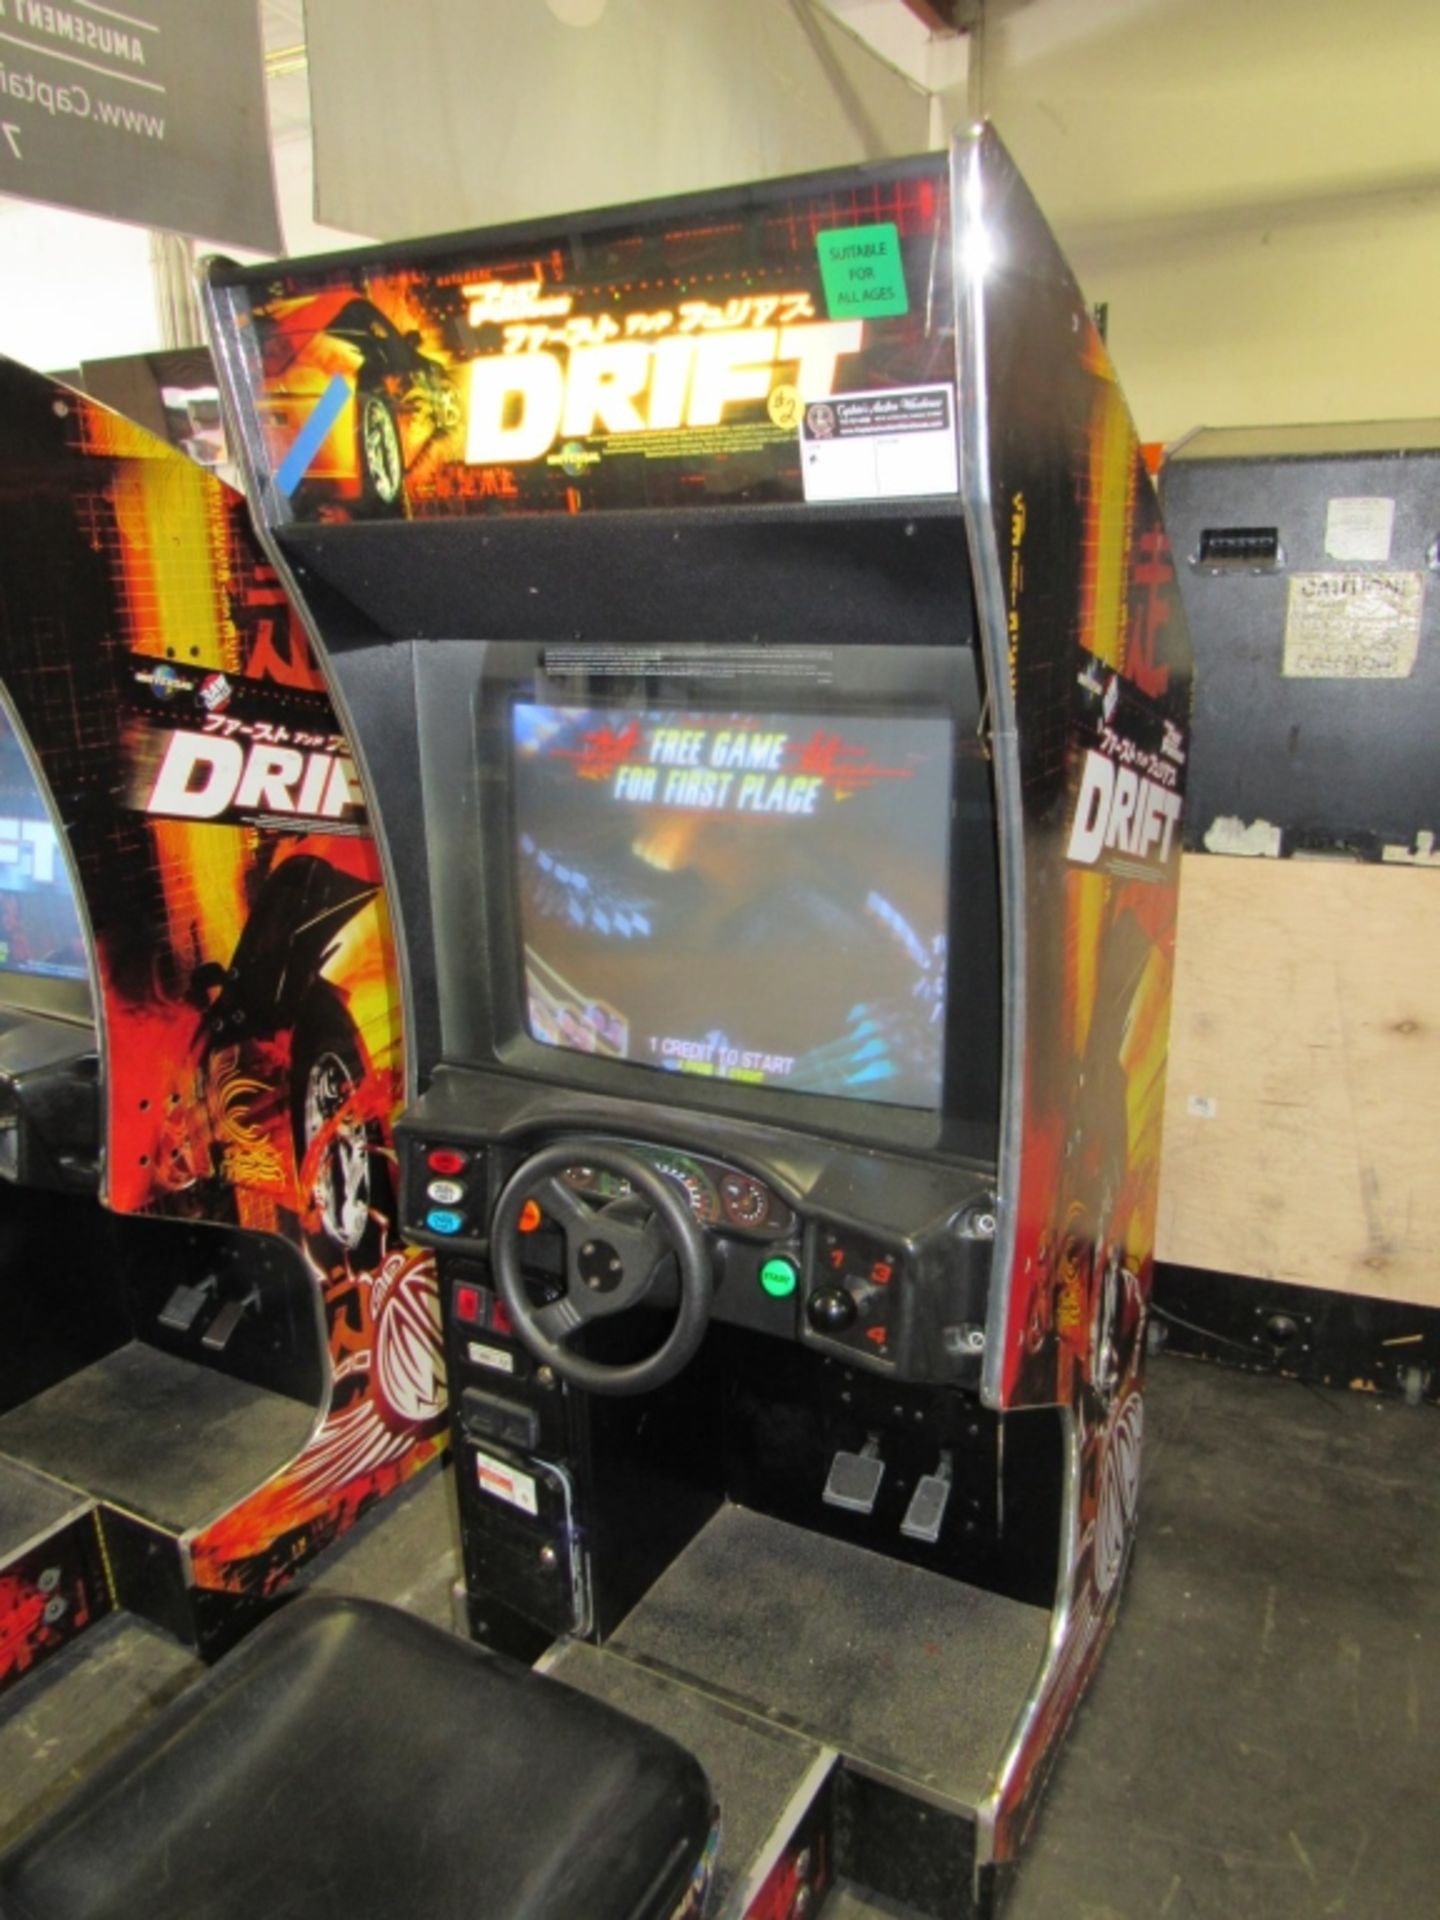 DRIFT FAST & FURIOUS RACING ARCADE GAME #2 - Image 3 of 3